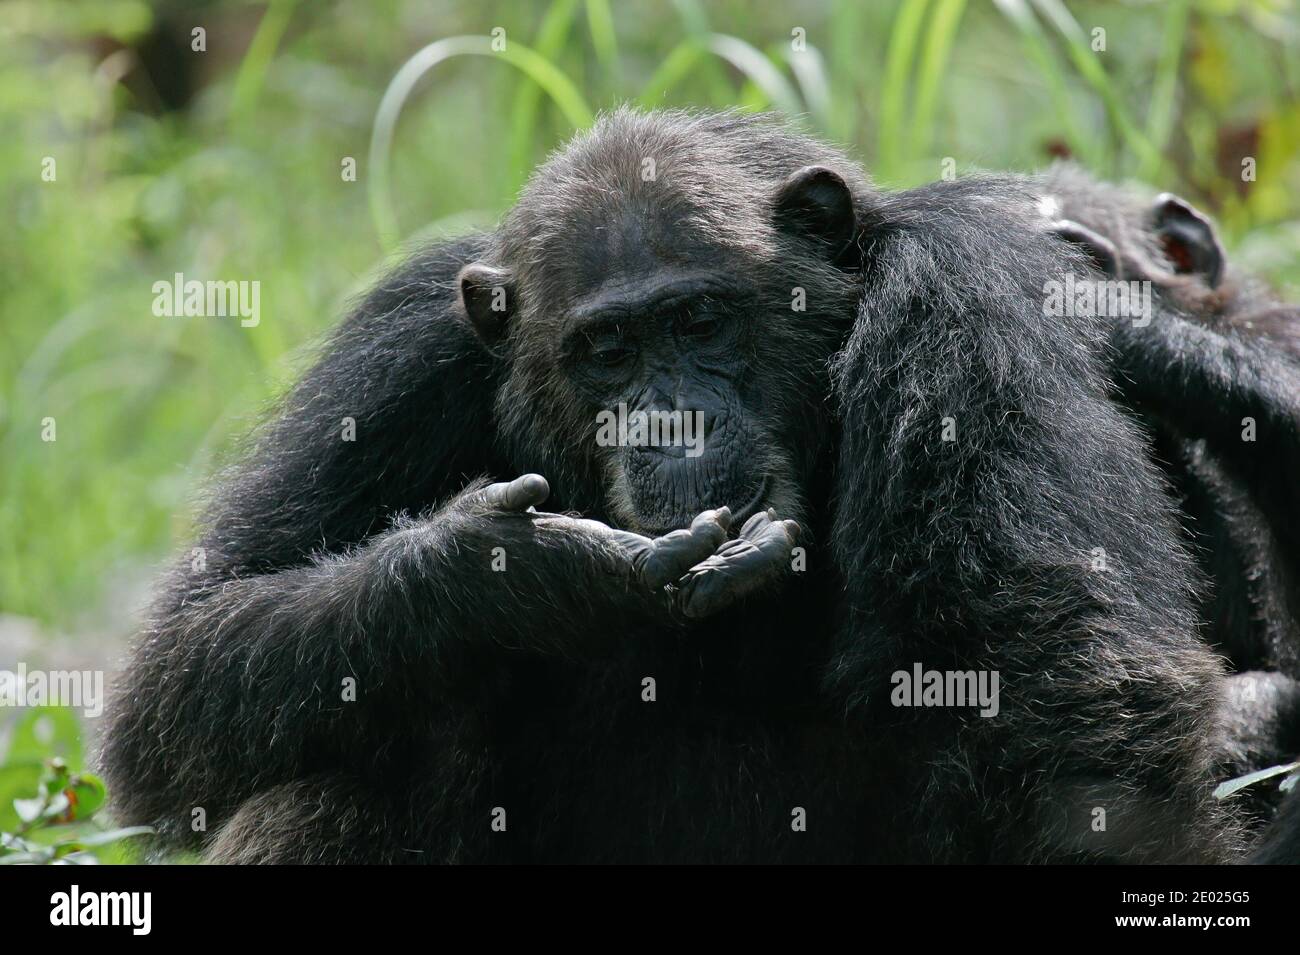 Eastern chimpanzee (Pan troglodytes schweinfurthii) curiously studying something in its hands, Gombe Stream National Park, Tanzania Stock Photo